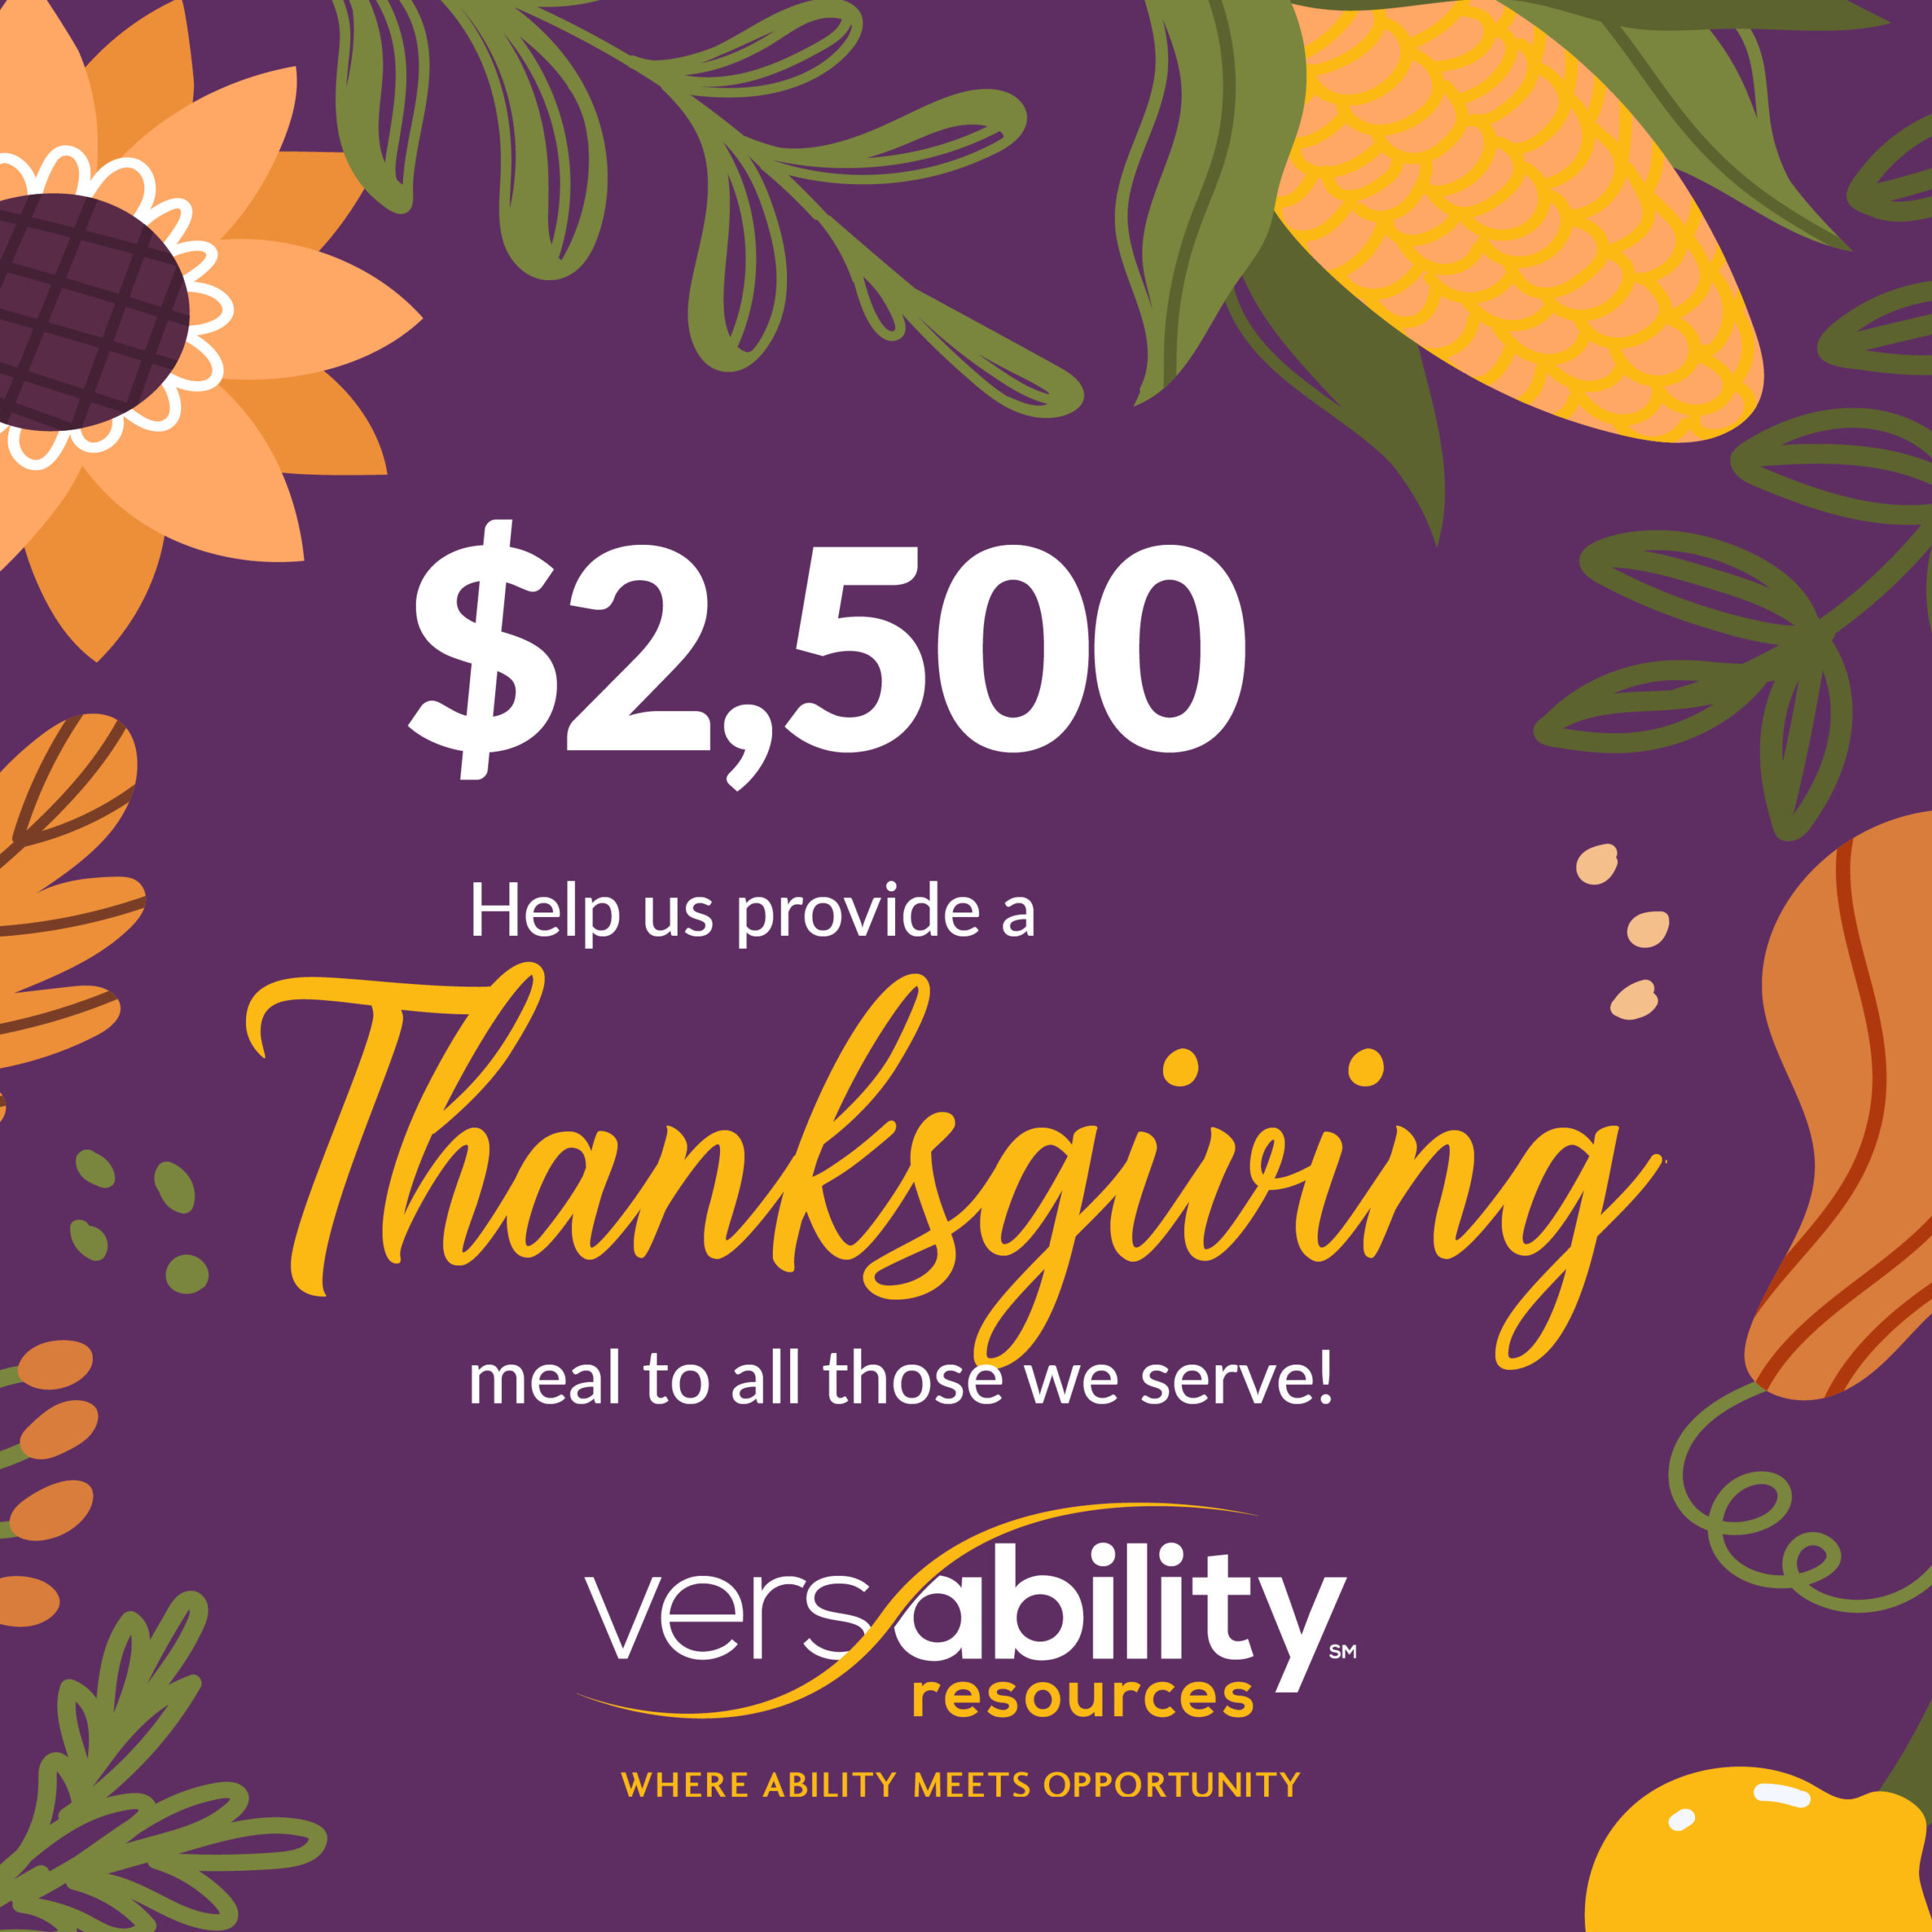 Donate to VersAbility Resources Fundraiser to Provide a Thanksgiving Meal to People with Disabilities